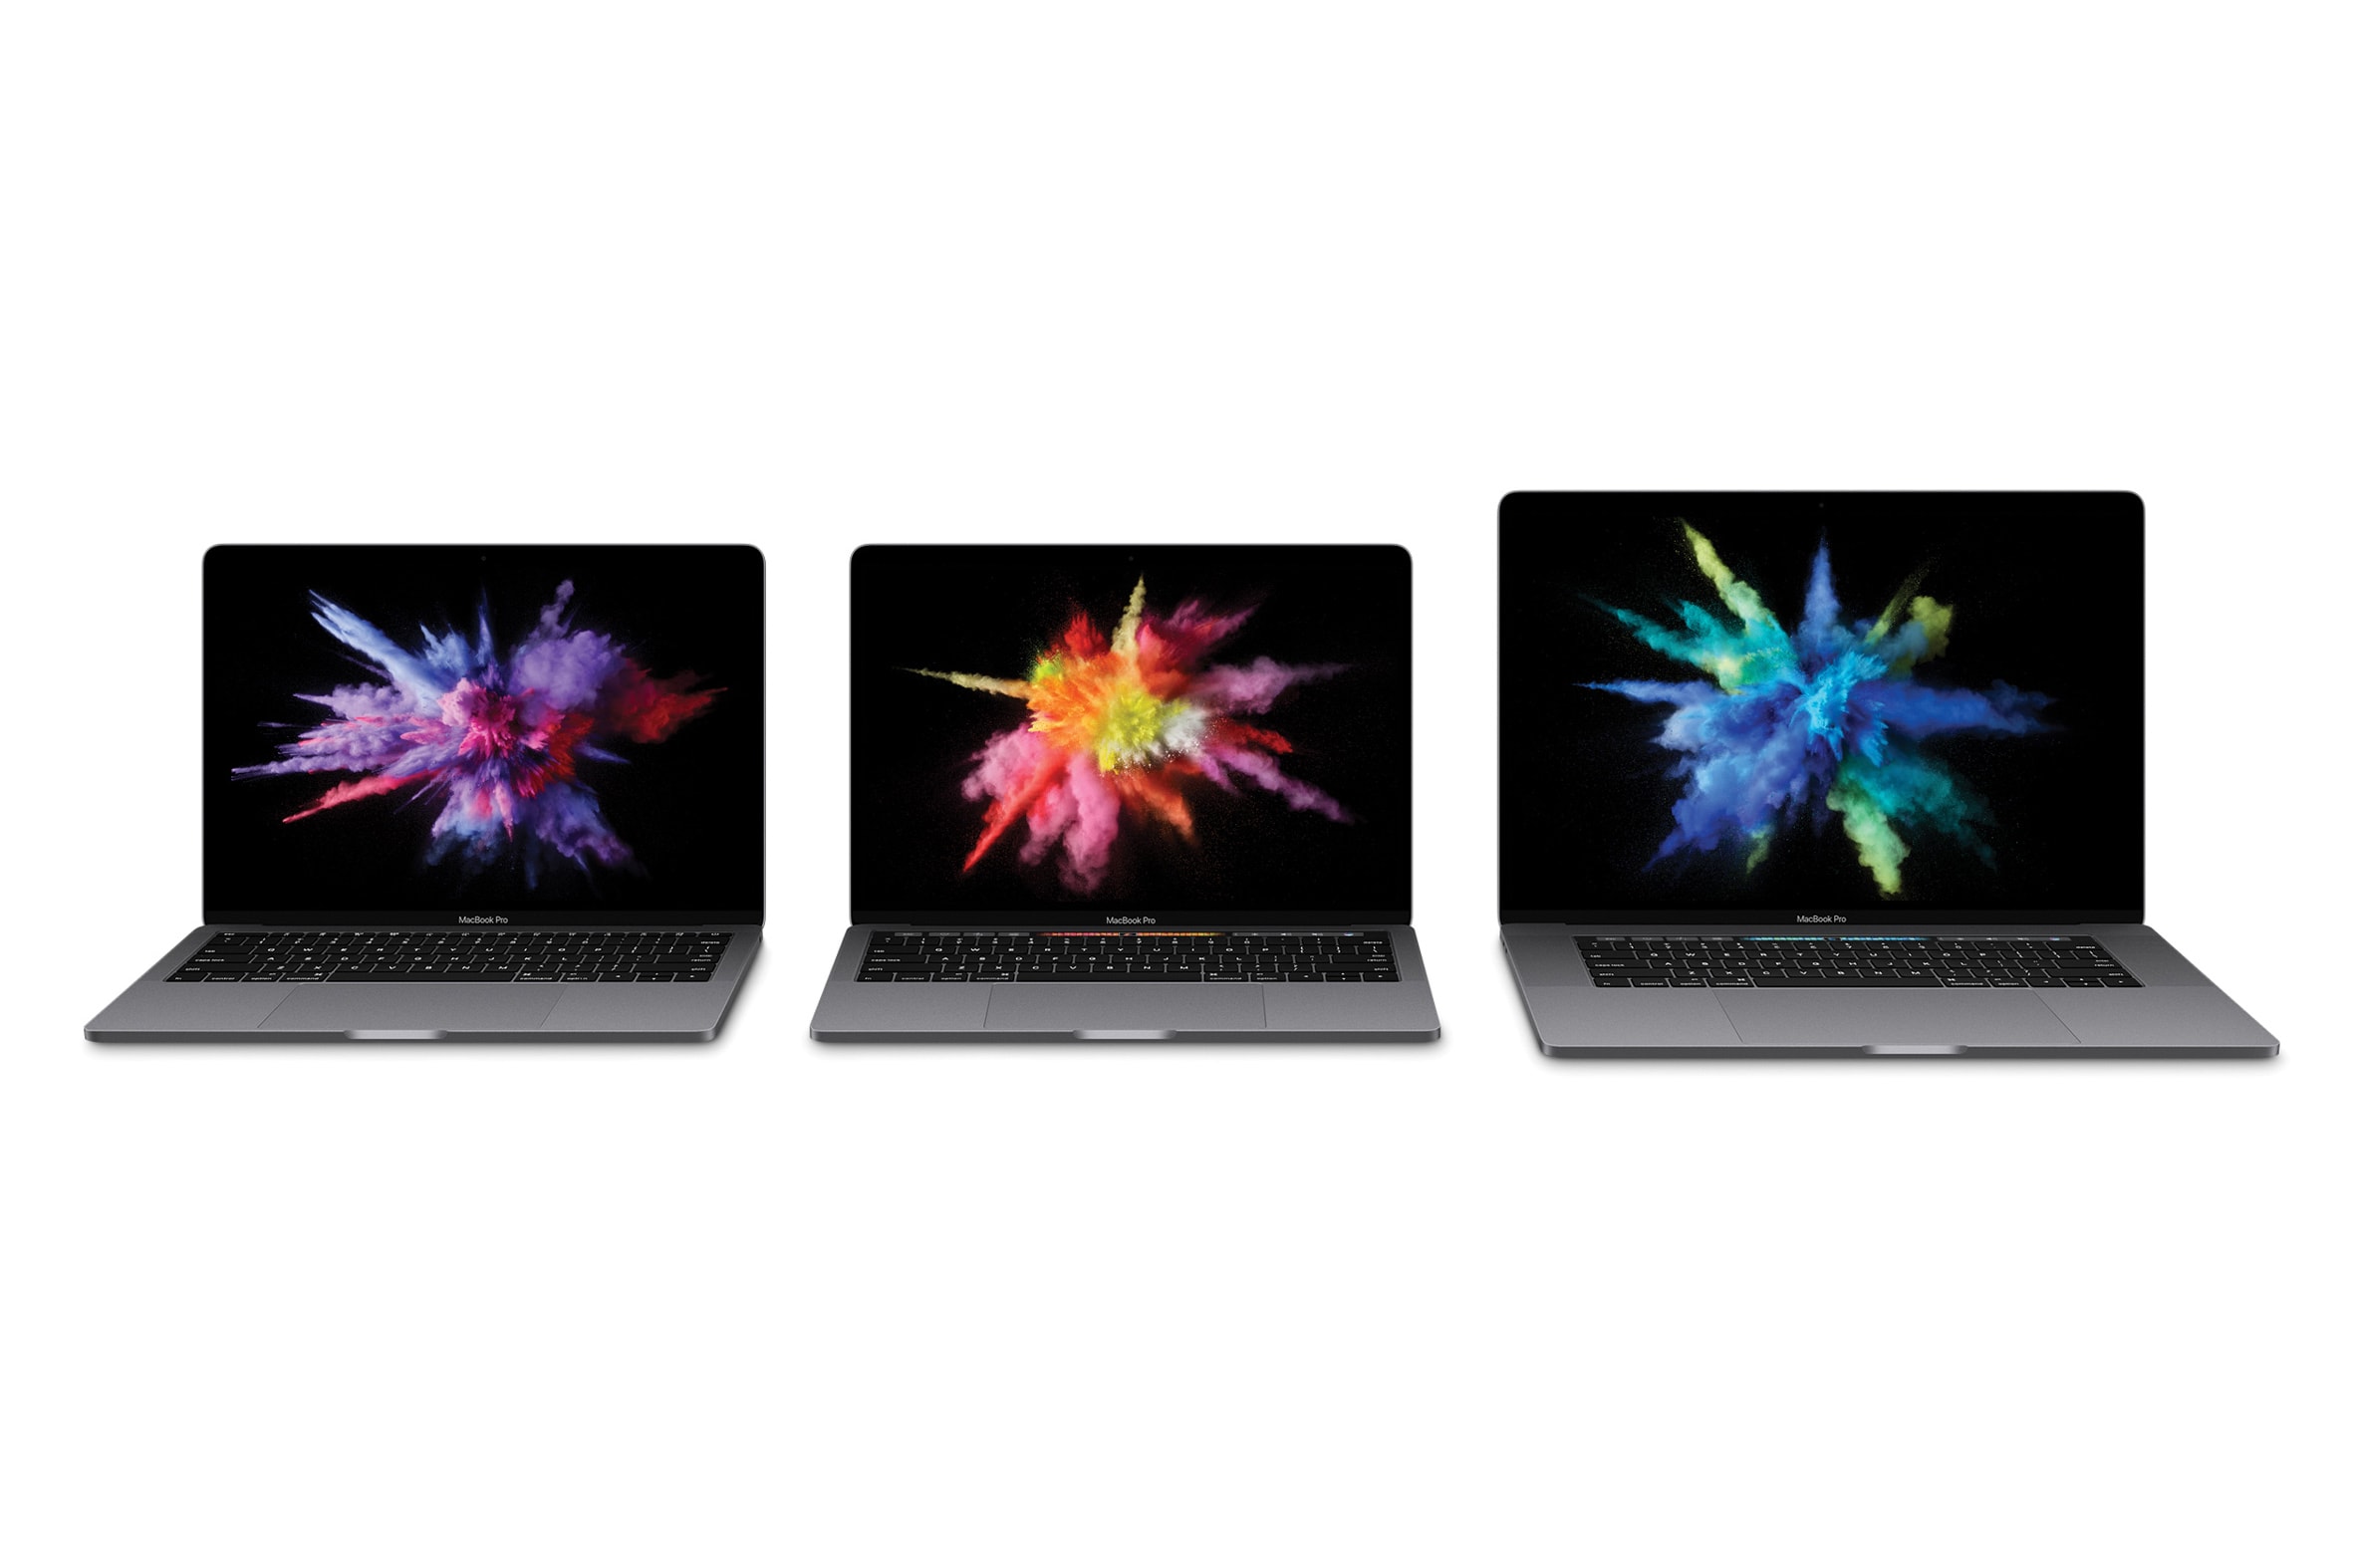 Apple Registers New Macs and iPads Ahead of WWDC